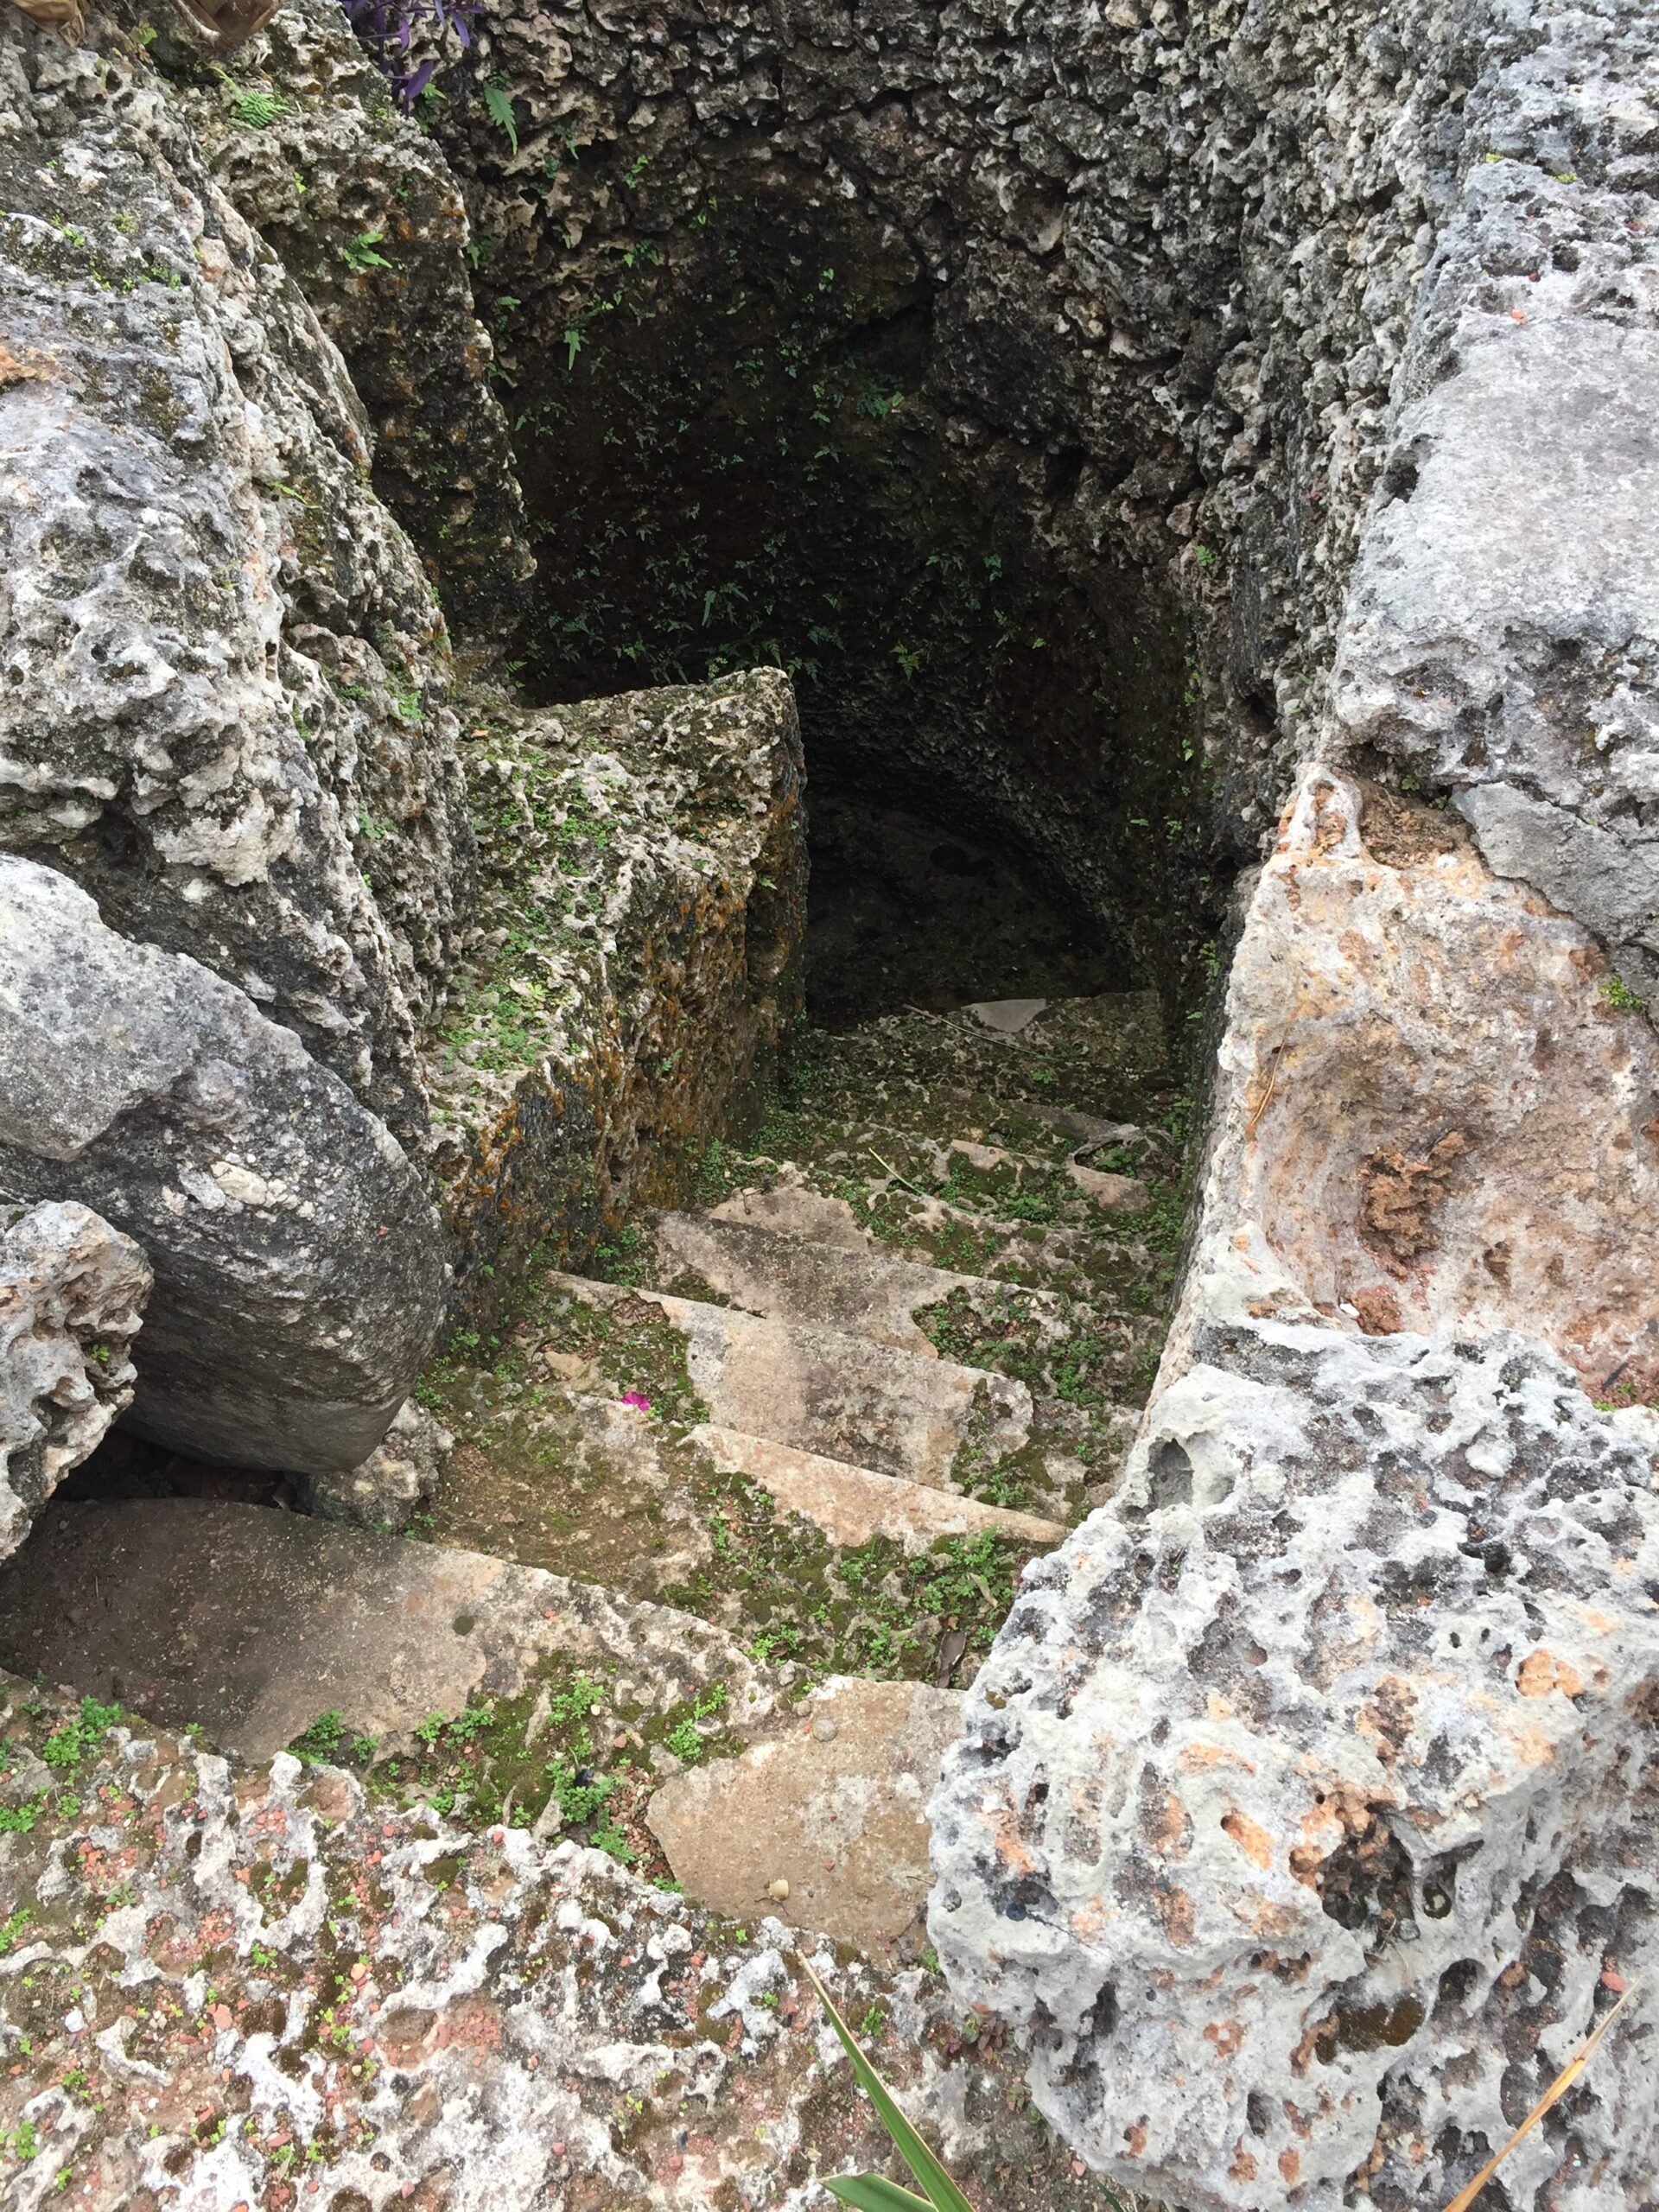 Secrets of Coral Castle, With Carolyn And Monty - Telekinesis And Anti-Gravity